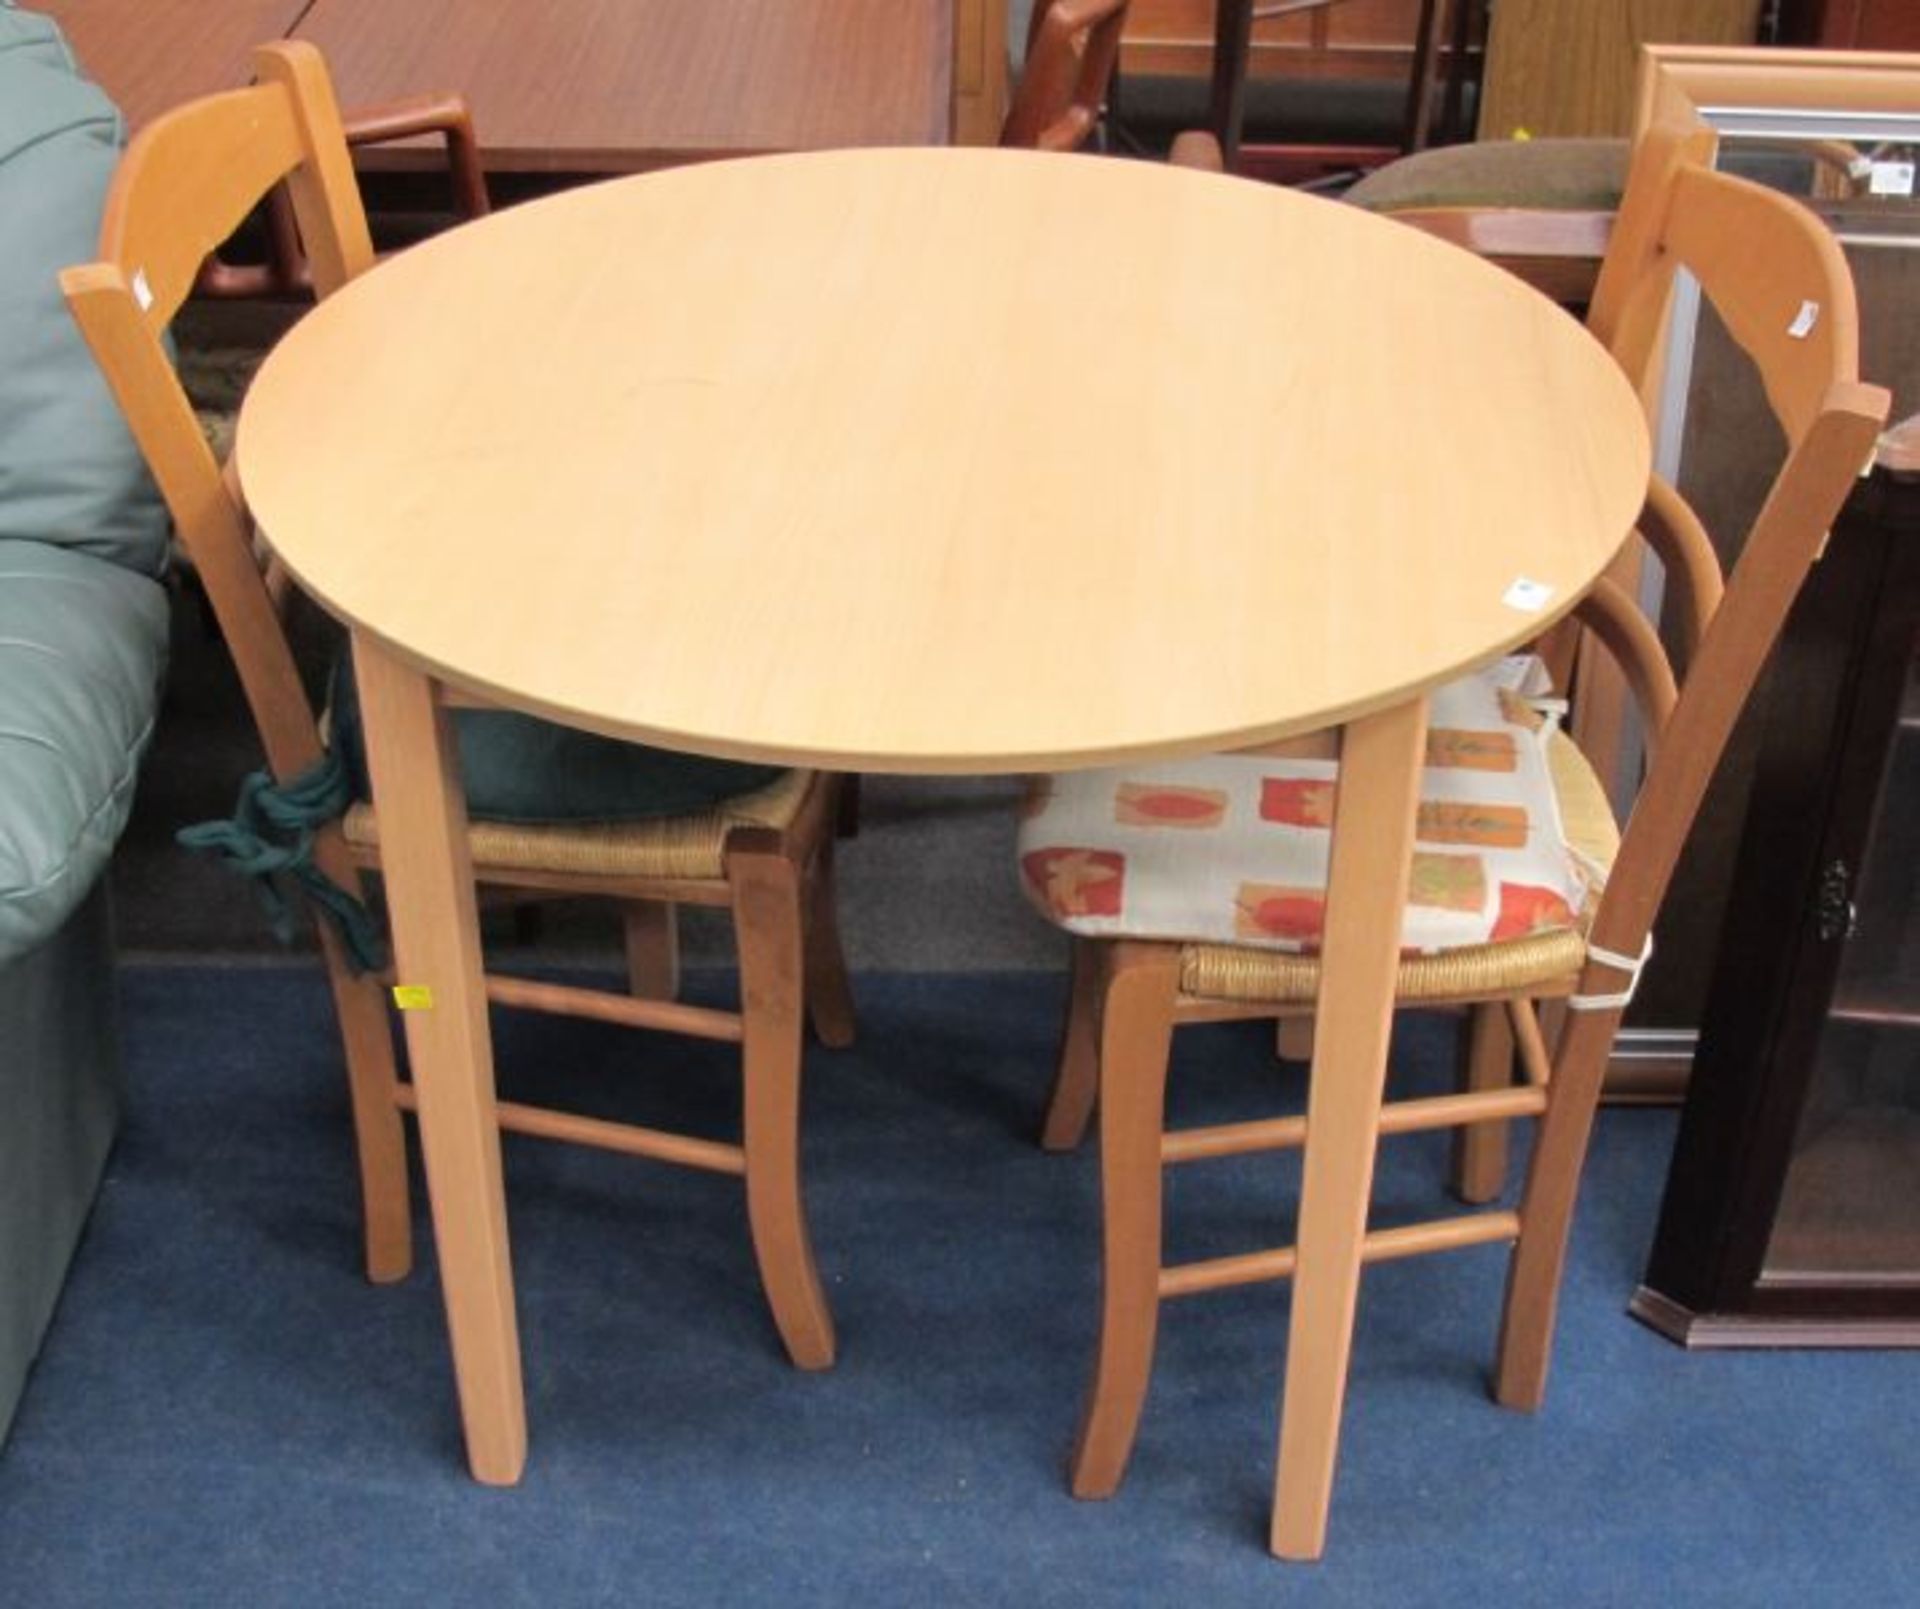 A Modern Light Wood Finish Circular Kitchen/Breakfast Table with Matching Single Chairs.  (est. £